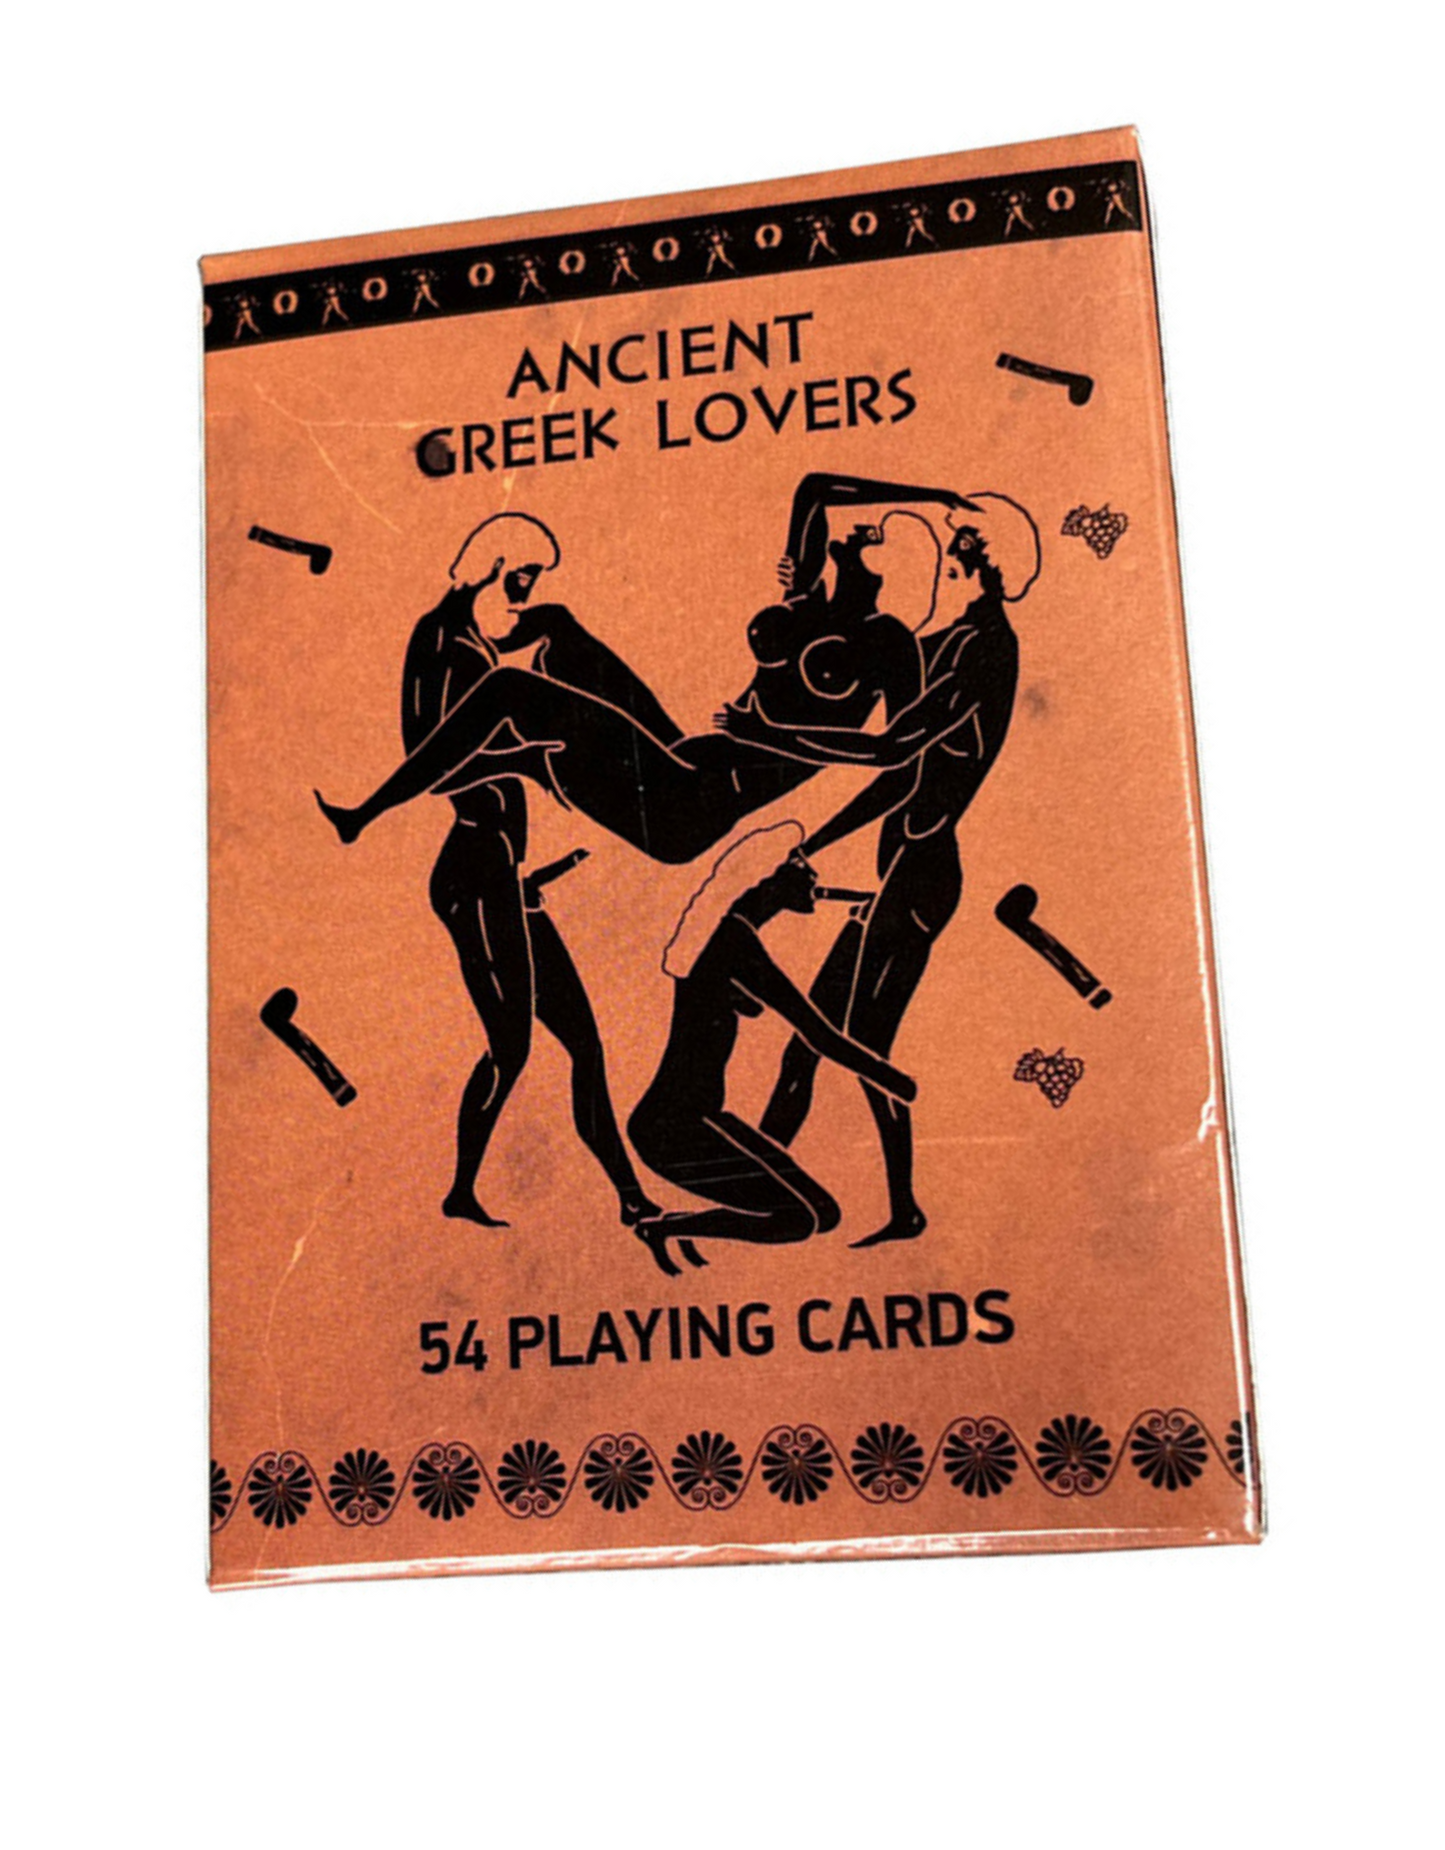 Erotic Scenes Ancient Greek Lovers Sex Positions Adult Playing Cards